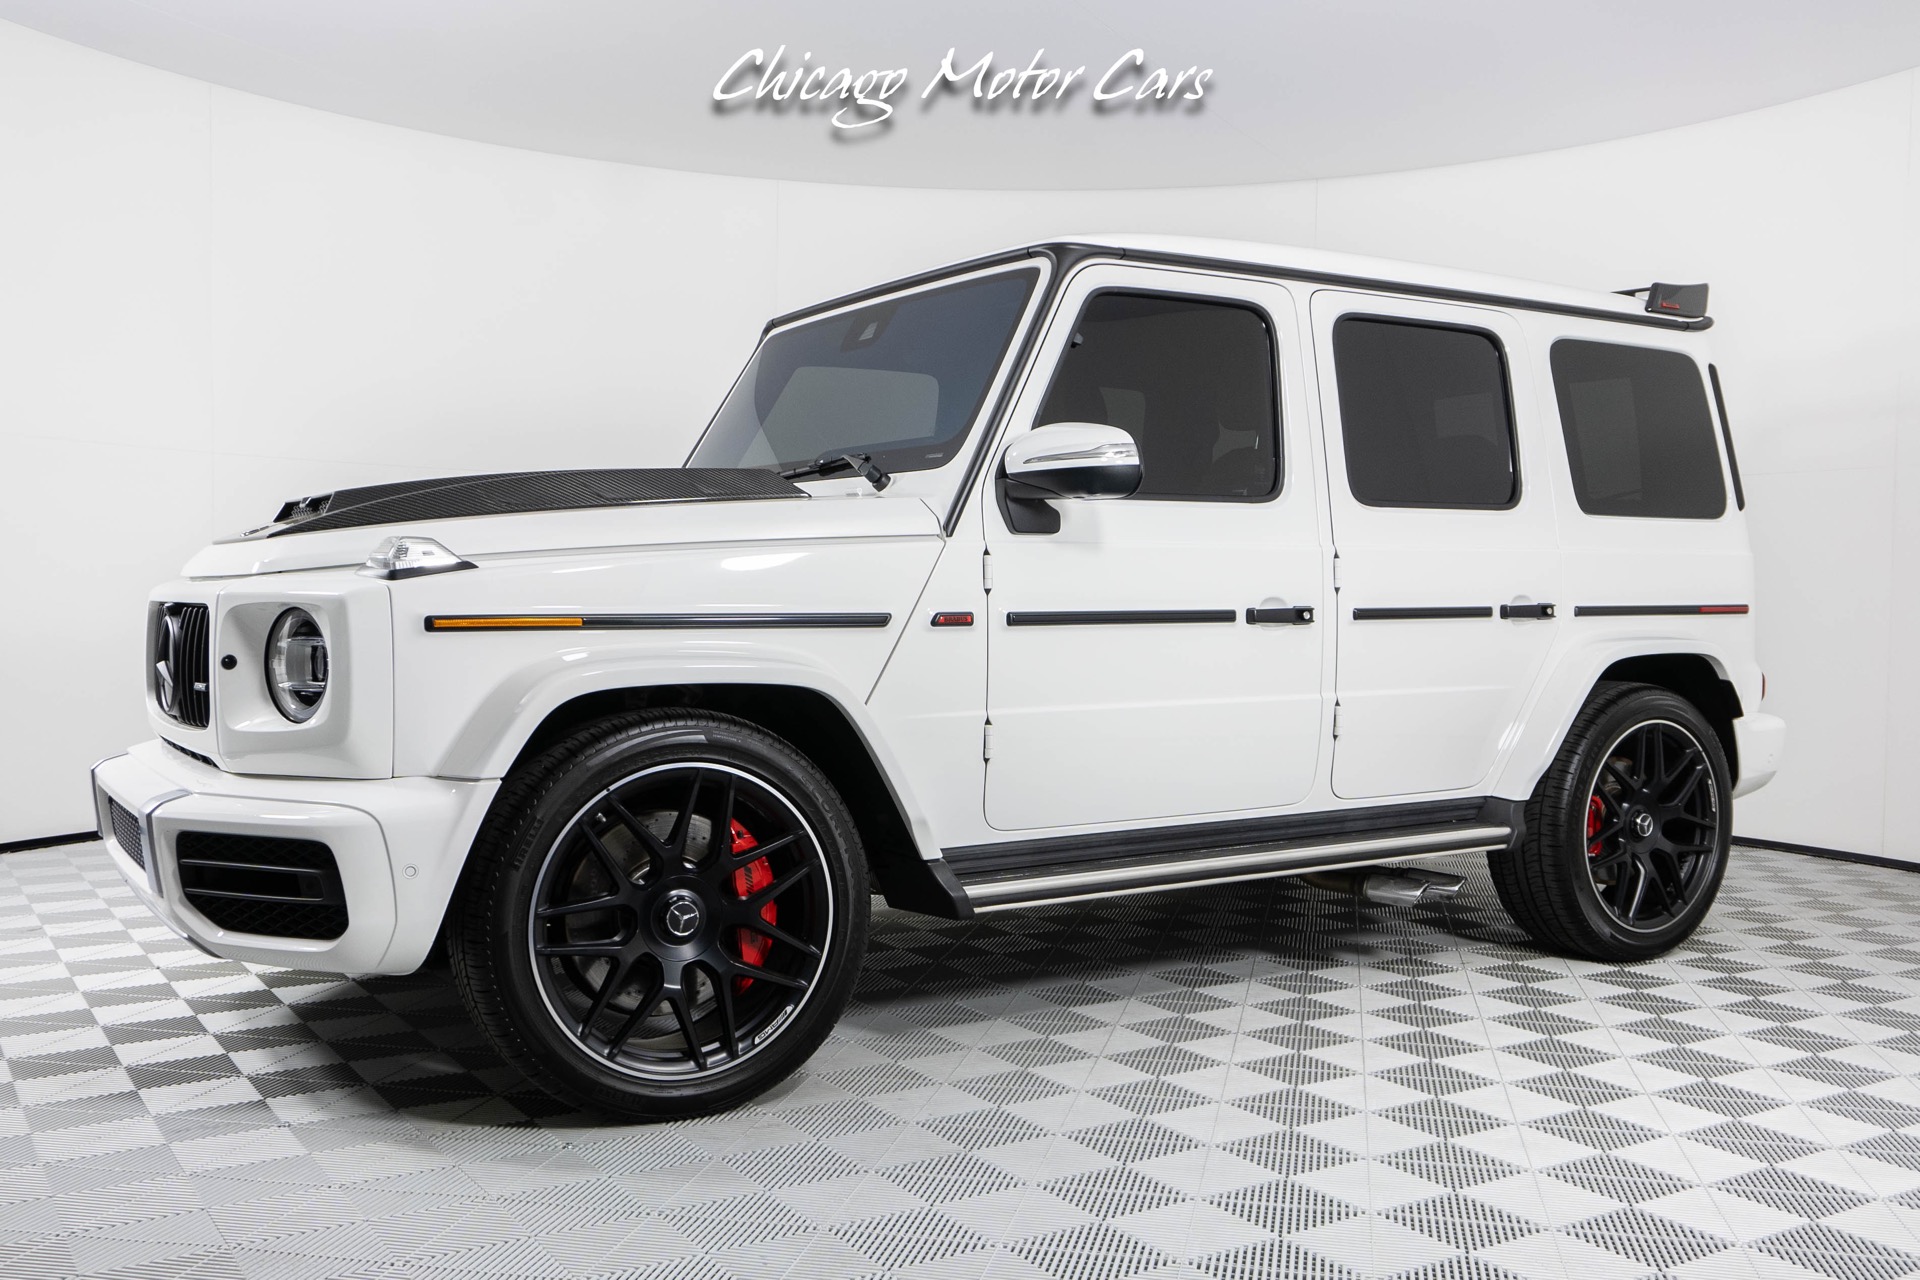 Used-2020-Mercedes-Benz-G63-AMG-900hp-Build-Exclusive-Interior-AMG-Carbon-Fiber-Trim-22in-Forged-Wheels